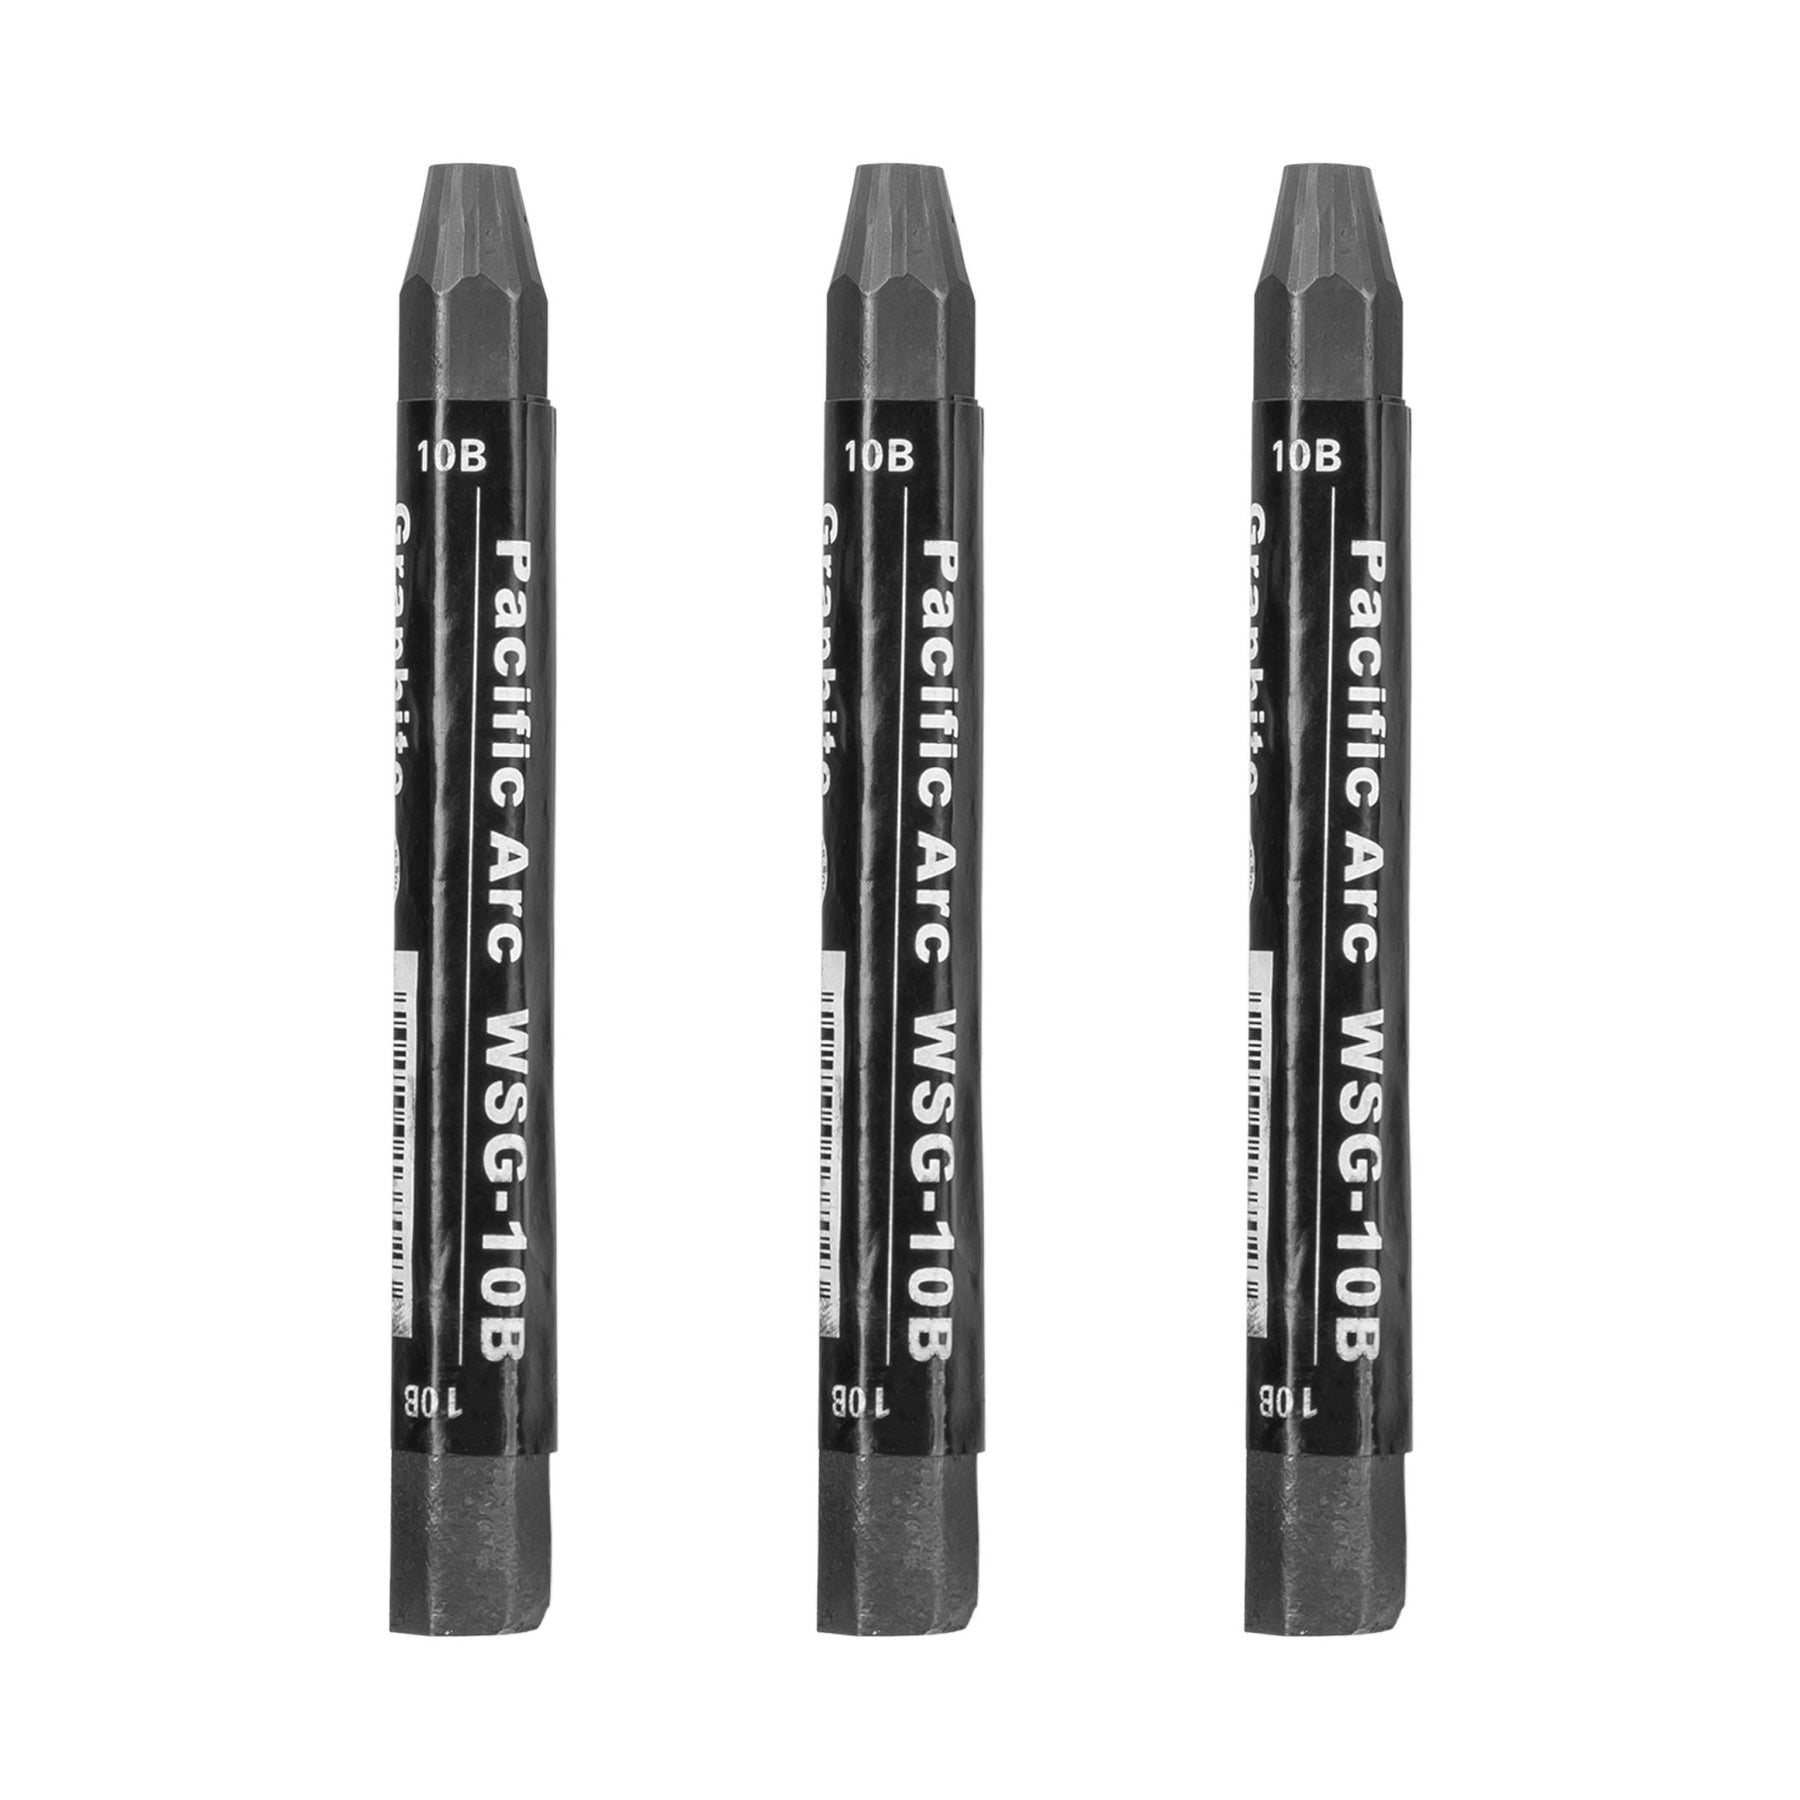  Pacific Arc Premium Graphite Drawing Pencils for Artists, B -  Professional Pencils for Drawing, Drafting, Sketching and Shading 12 Pk. -  Great Non Toxic Art Supplies Set for Adults and